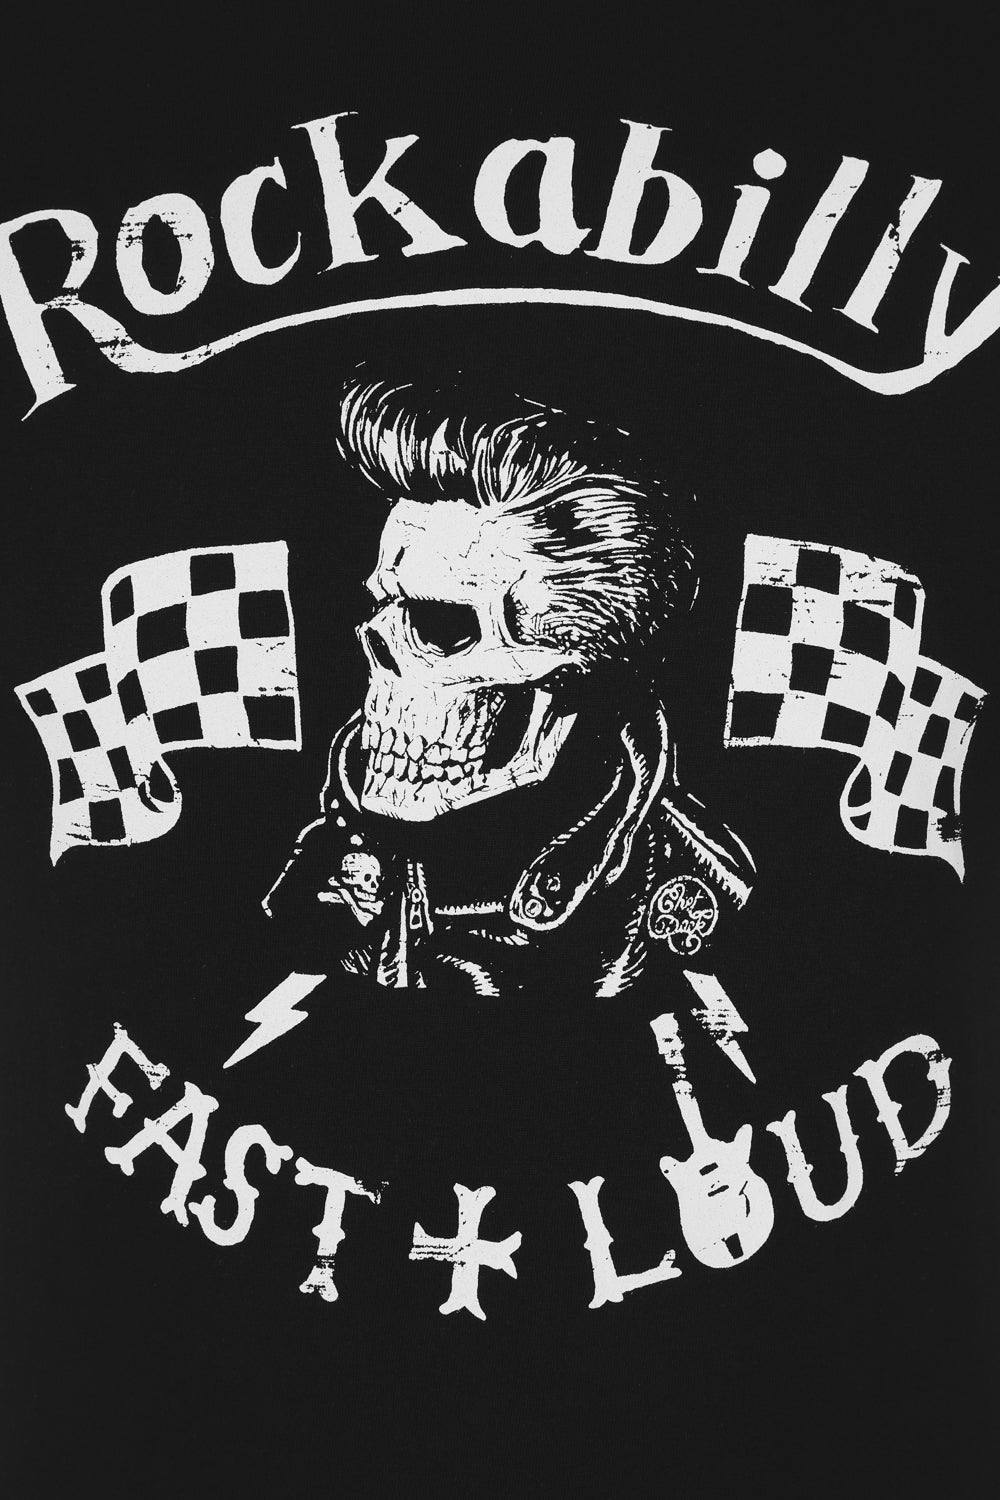 Fast and Loud t-shirt